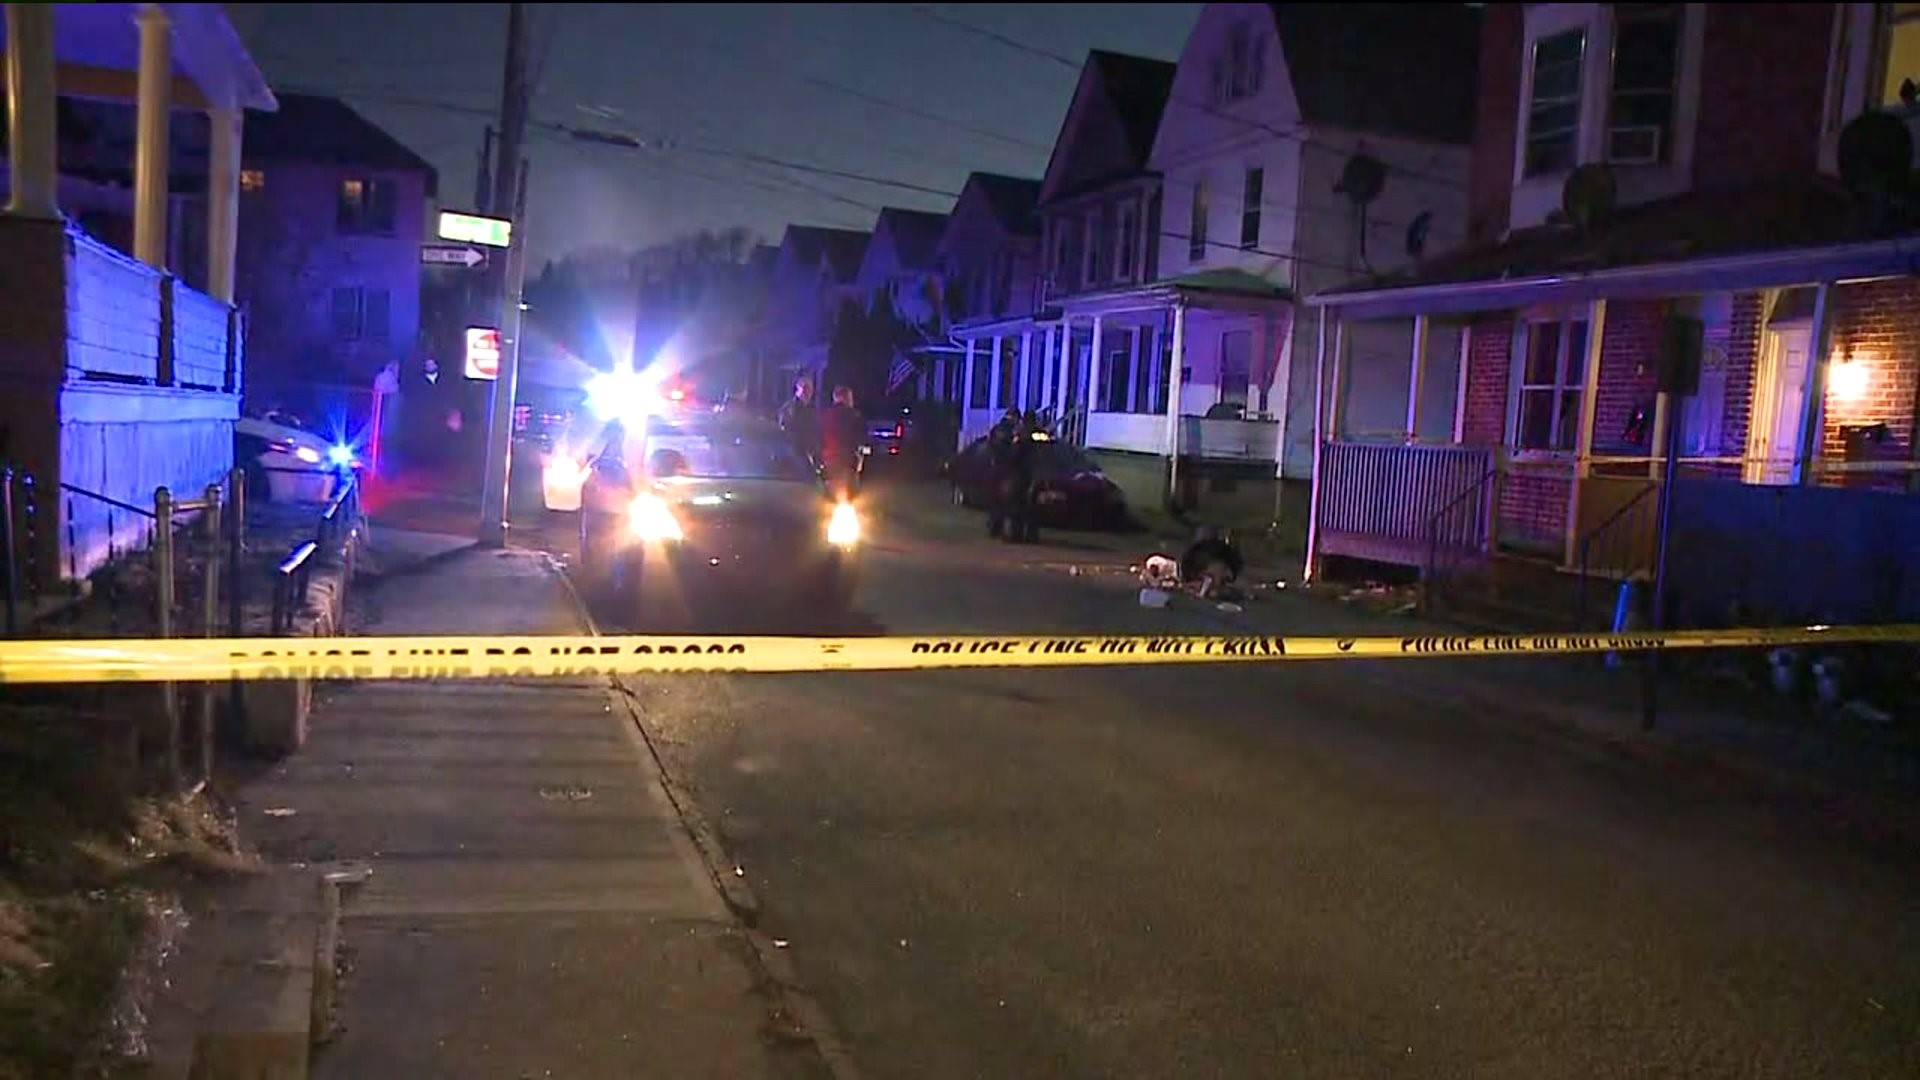 Police are investigating reports of a shooting at the intersection of Hutson and Metcalf Streets.